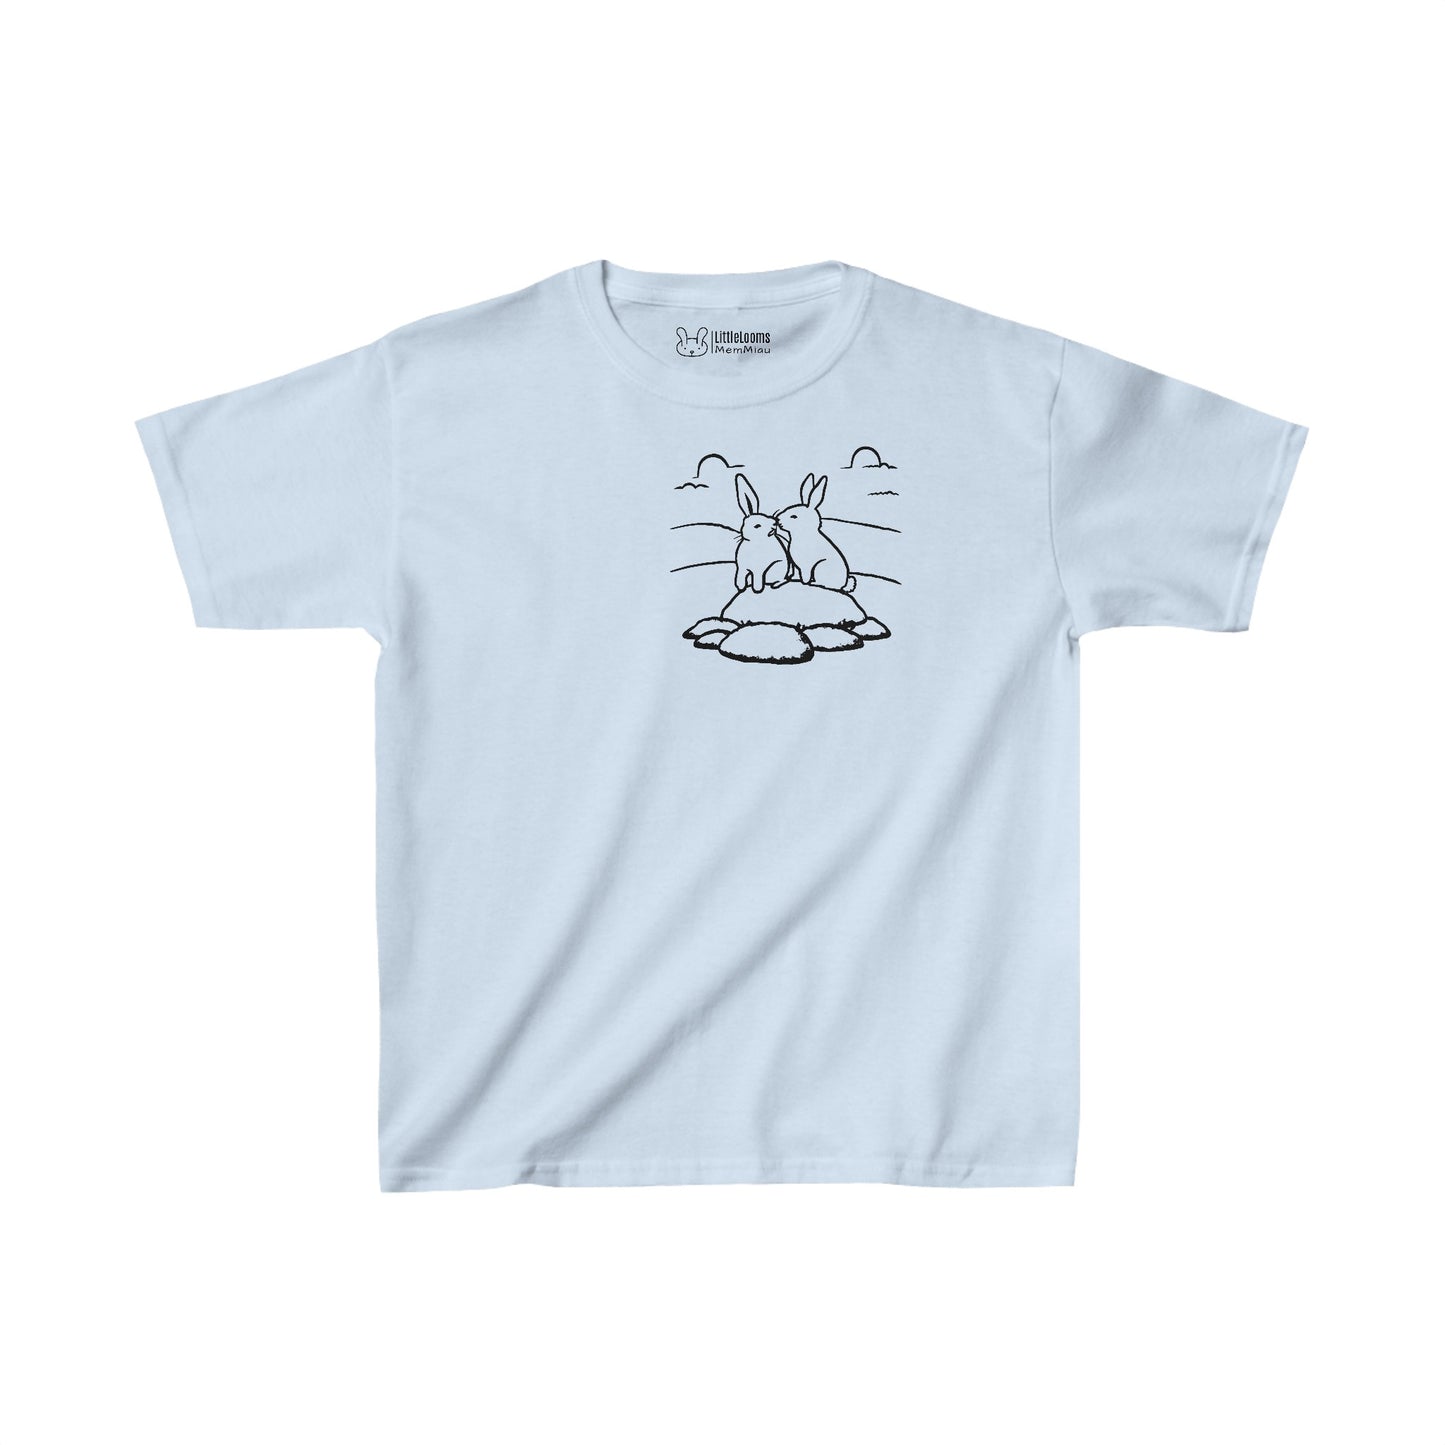 Short sleeve t-shirt with two rabbits design (pocket style)